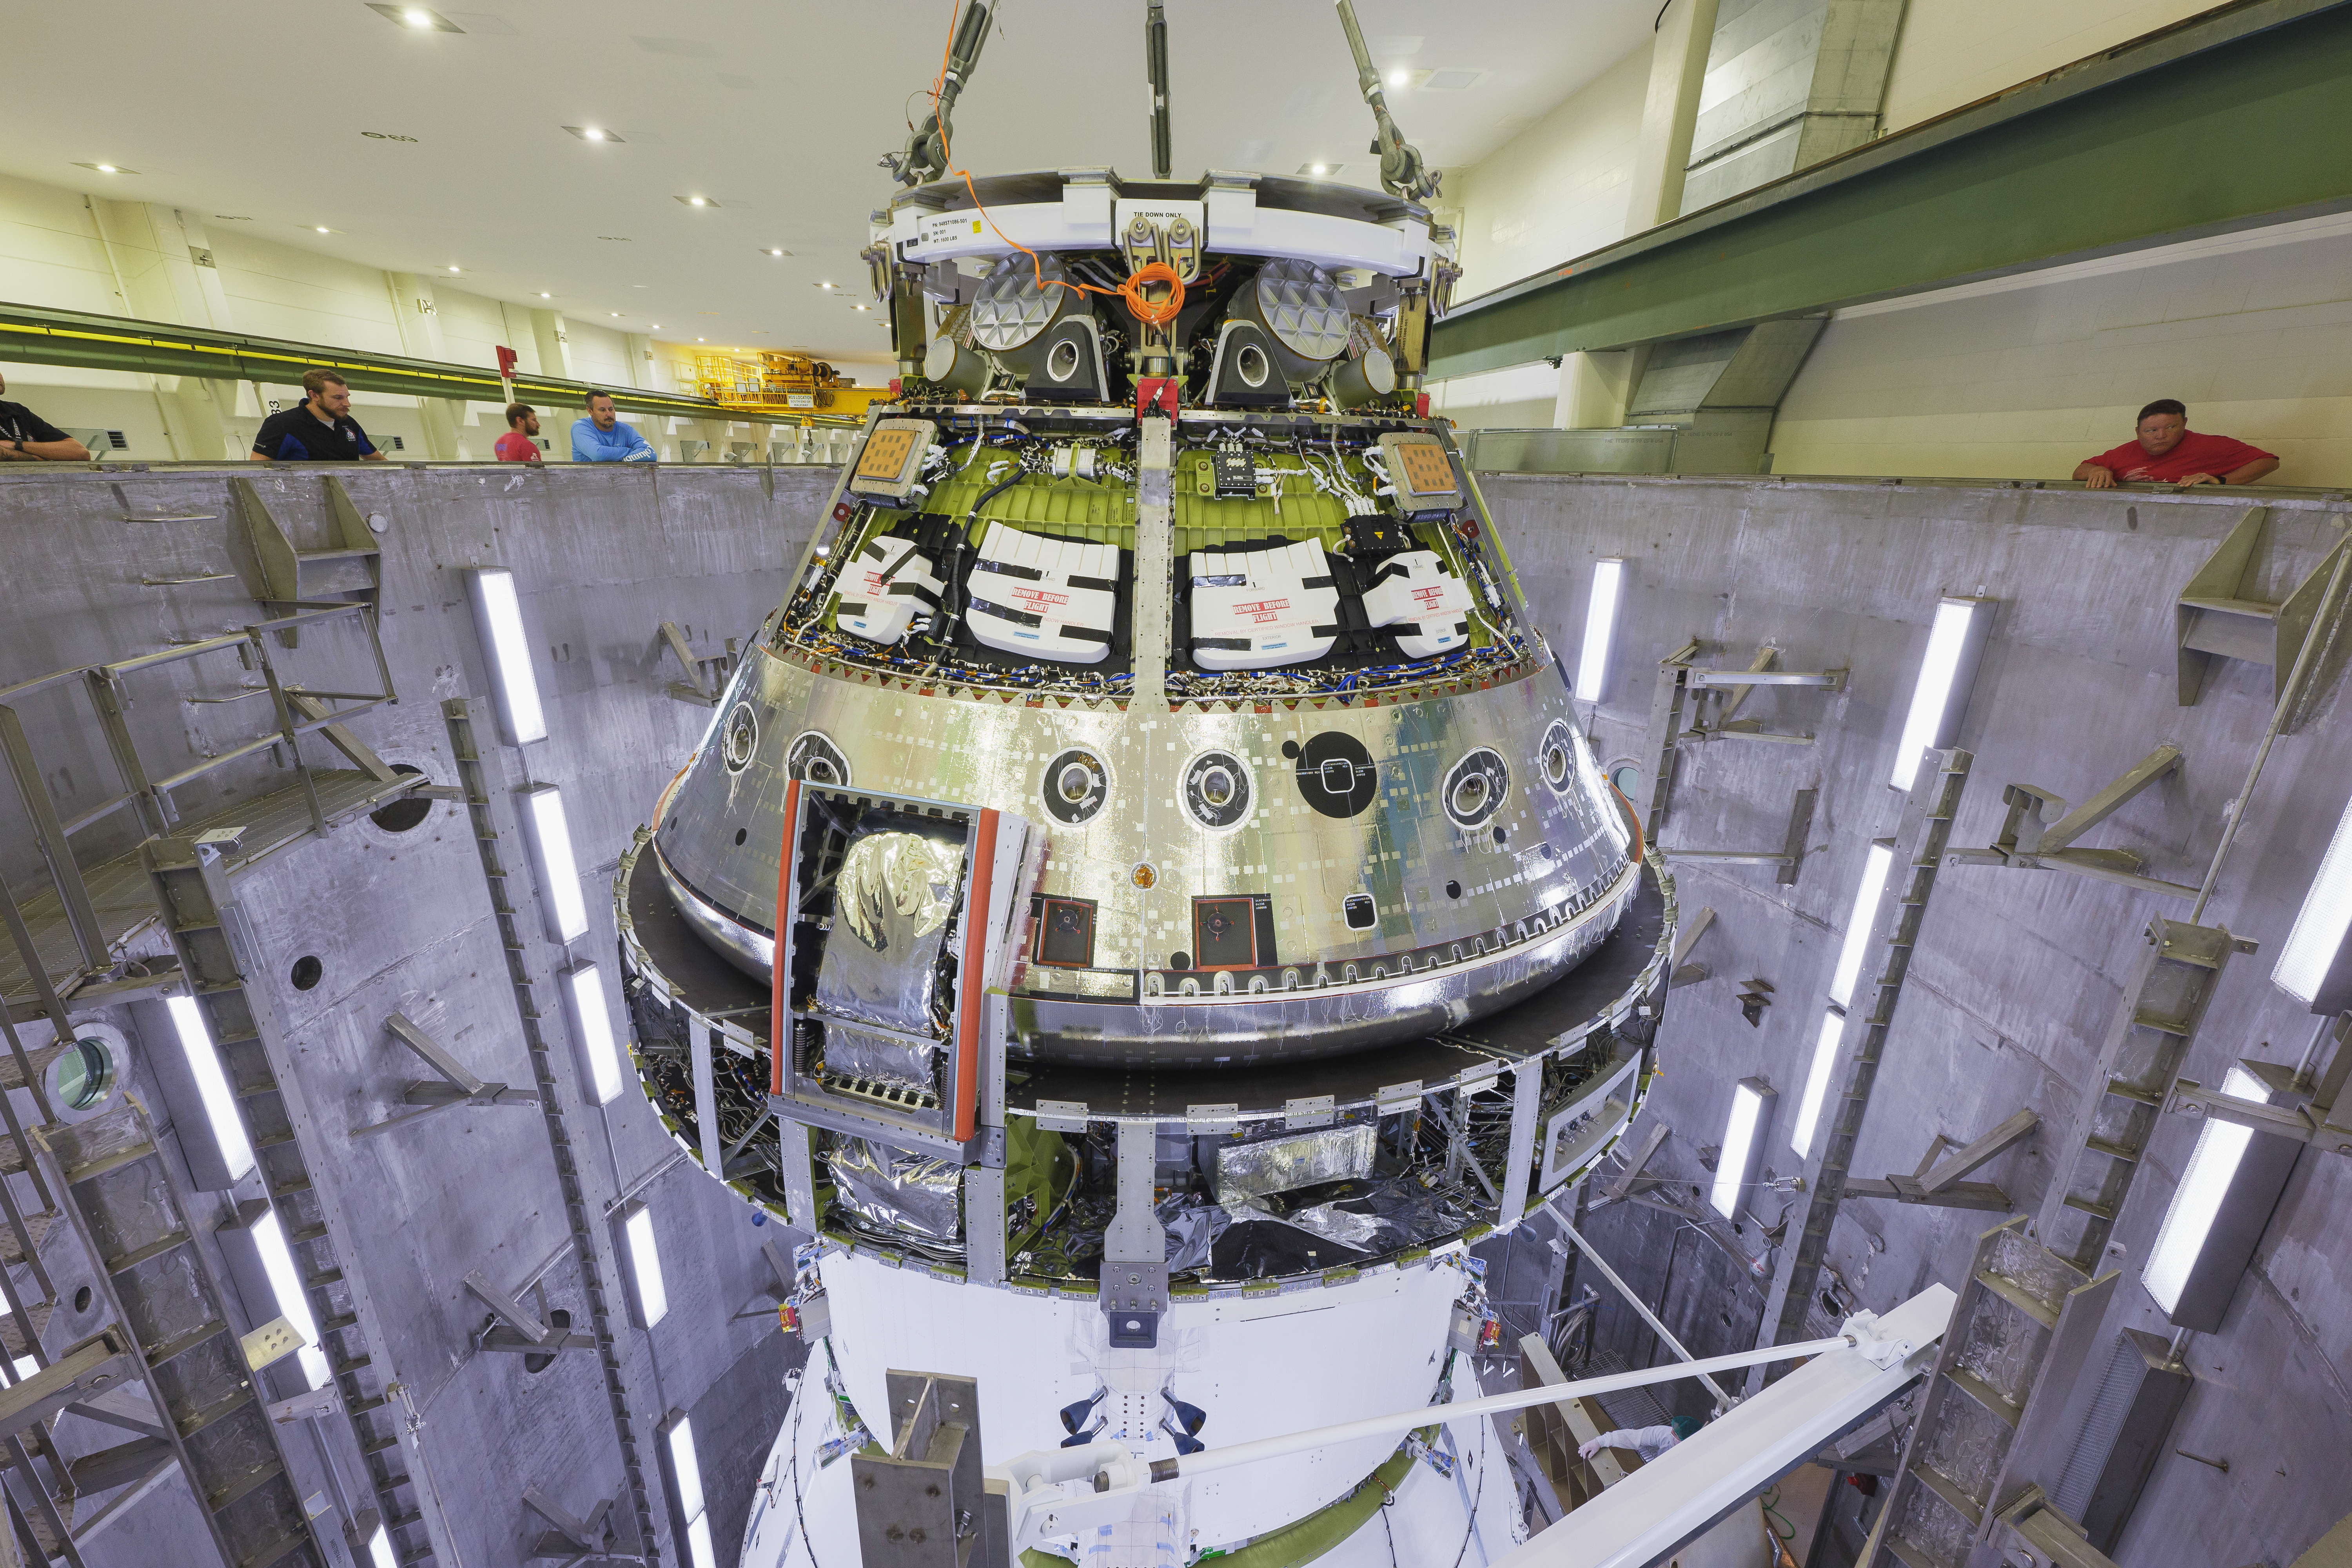 The Artemis II Orion spacecraft is pictured surrounded by the metal walls of the altitude chamber. Orion is a cone shaped spacecraft with metal and wires exposed. Technicians stand around the open top of the altitude chamber.